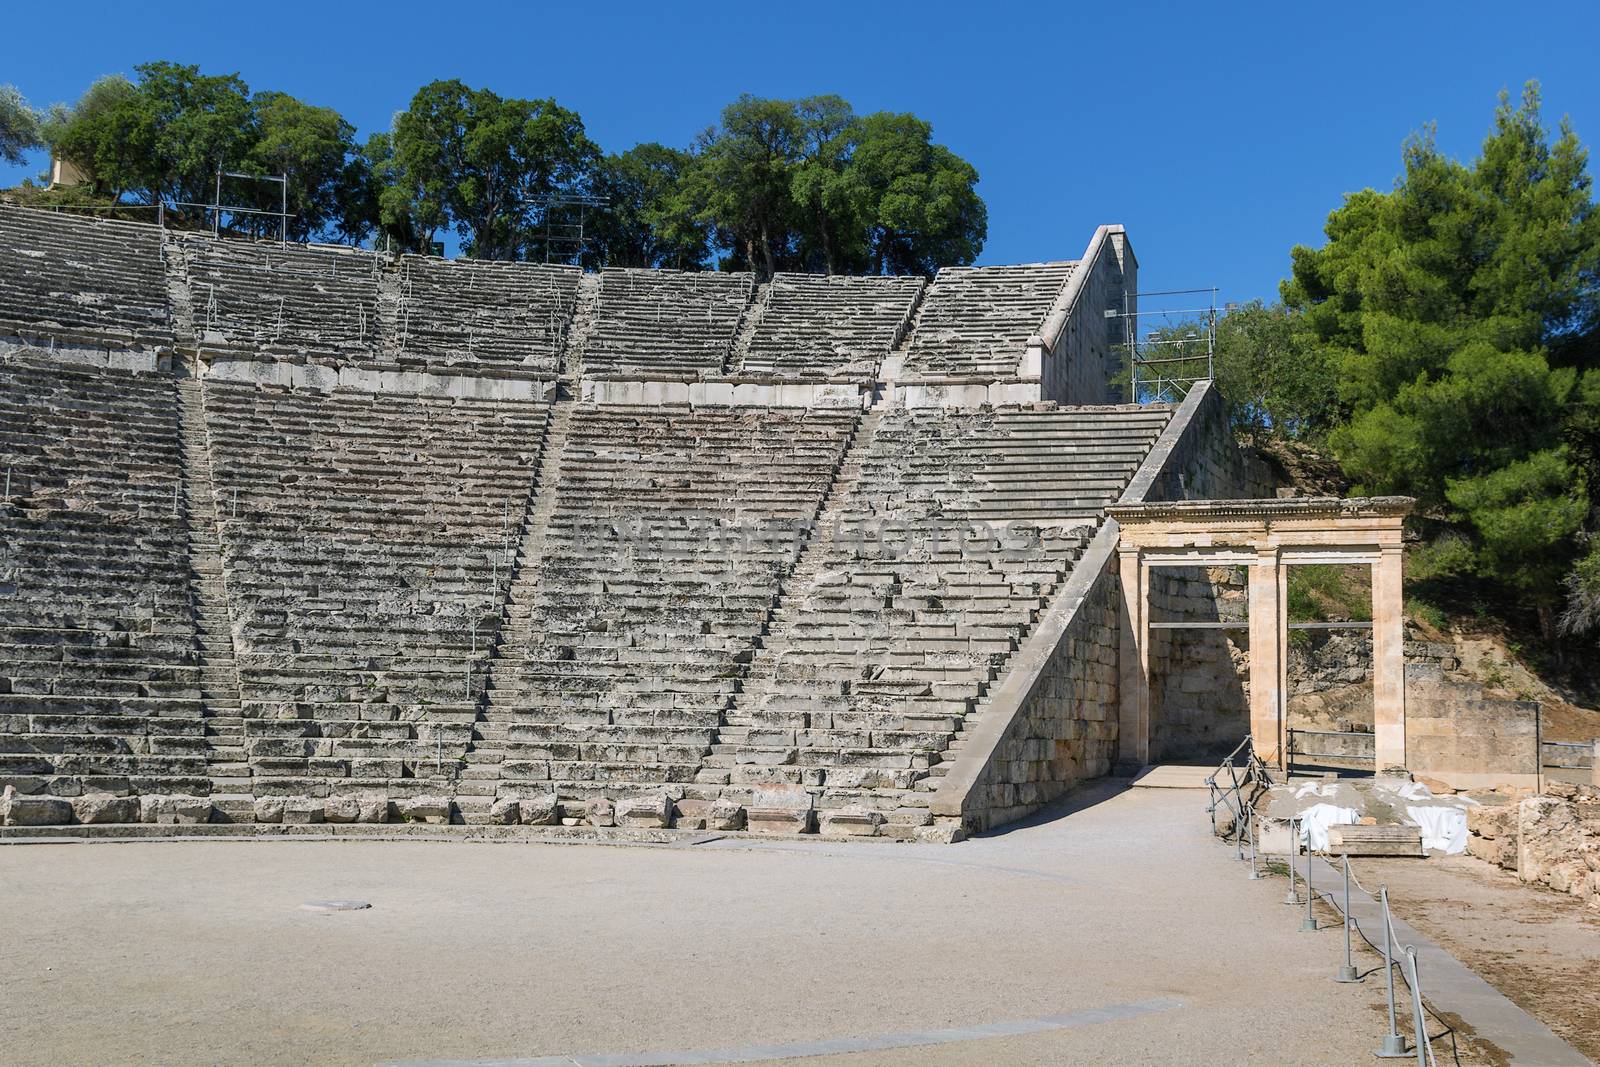 Epidaurus Theater. The theater was designed by Polykleitos the Younger in the 4th century BC.